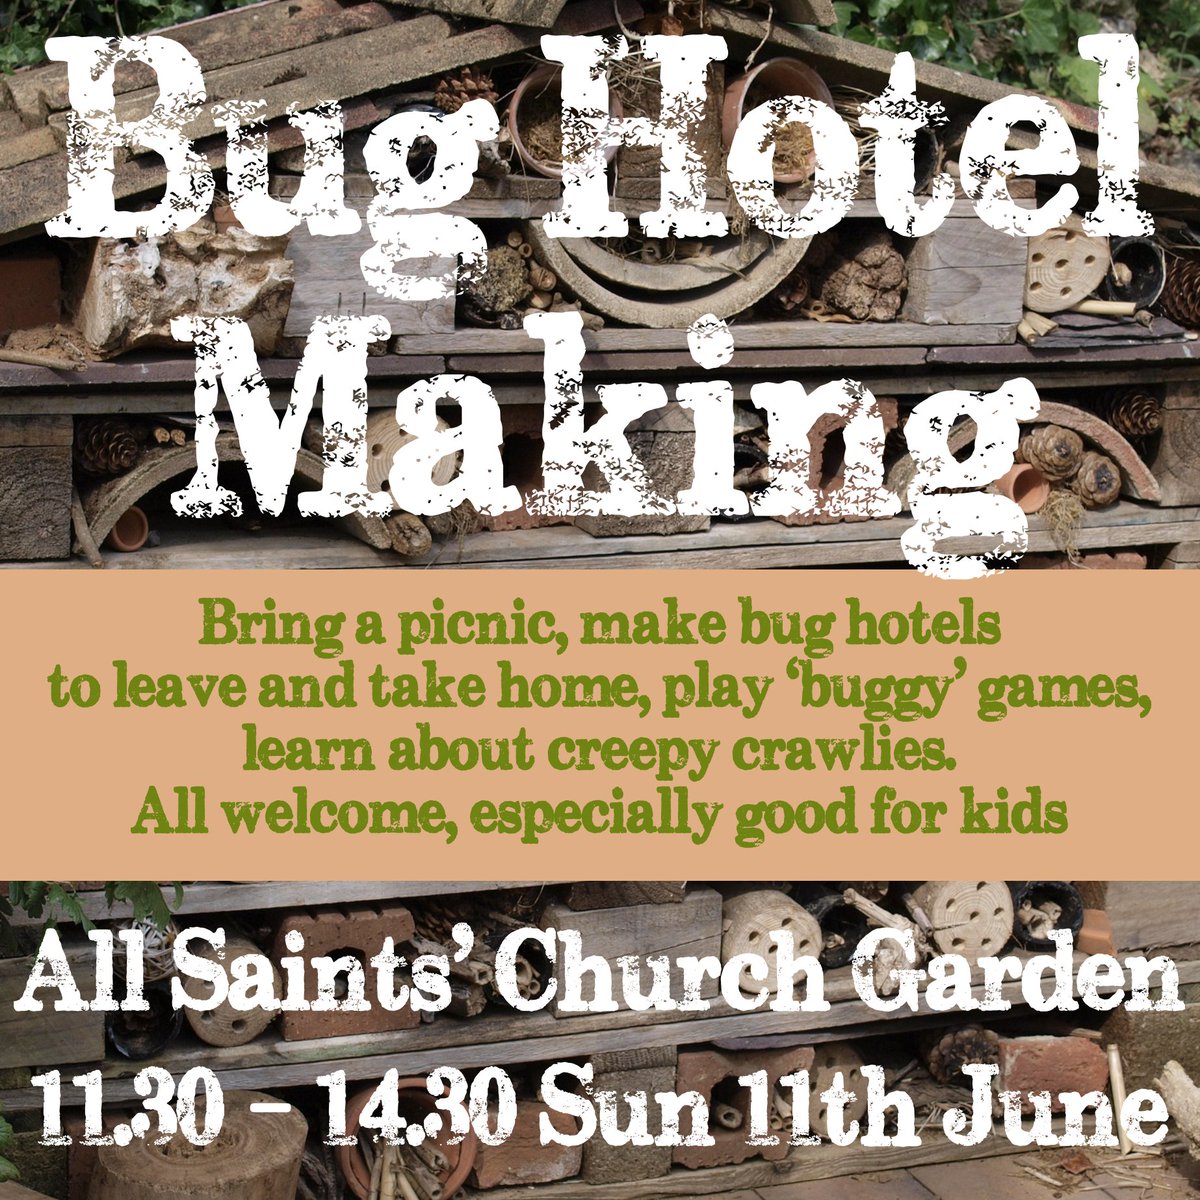 As part of SustFest, we are holding a BUG HOTEL MAKING event 11.30-14.30, 11 Jun
Open to all, esp good for kids
We'll make a big bug hotel for the church & little ones to take home, play fun games, activities, and learn about the wonderful creepy creatures! 
Bring a picnic